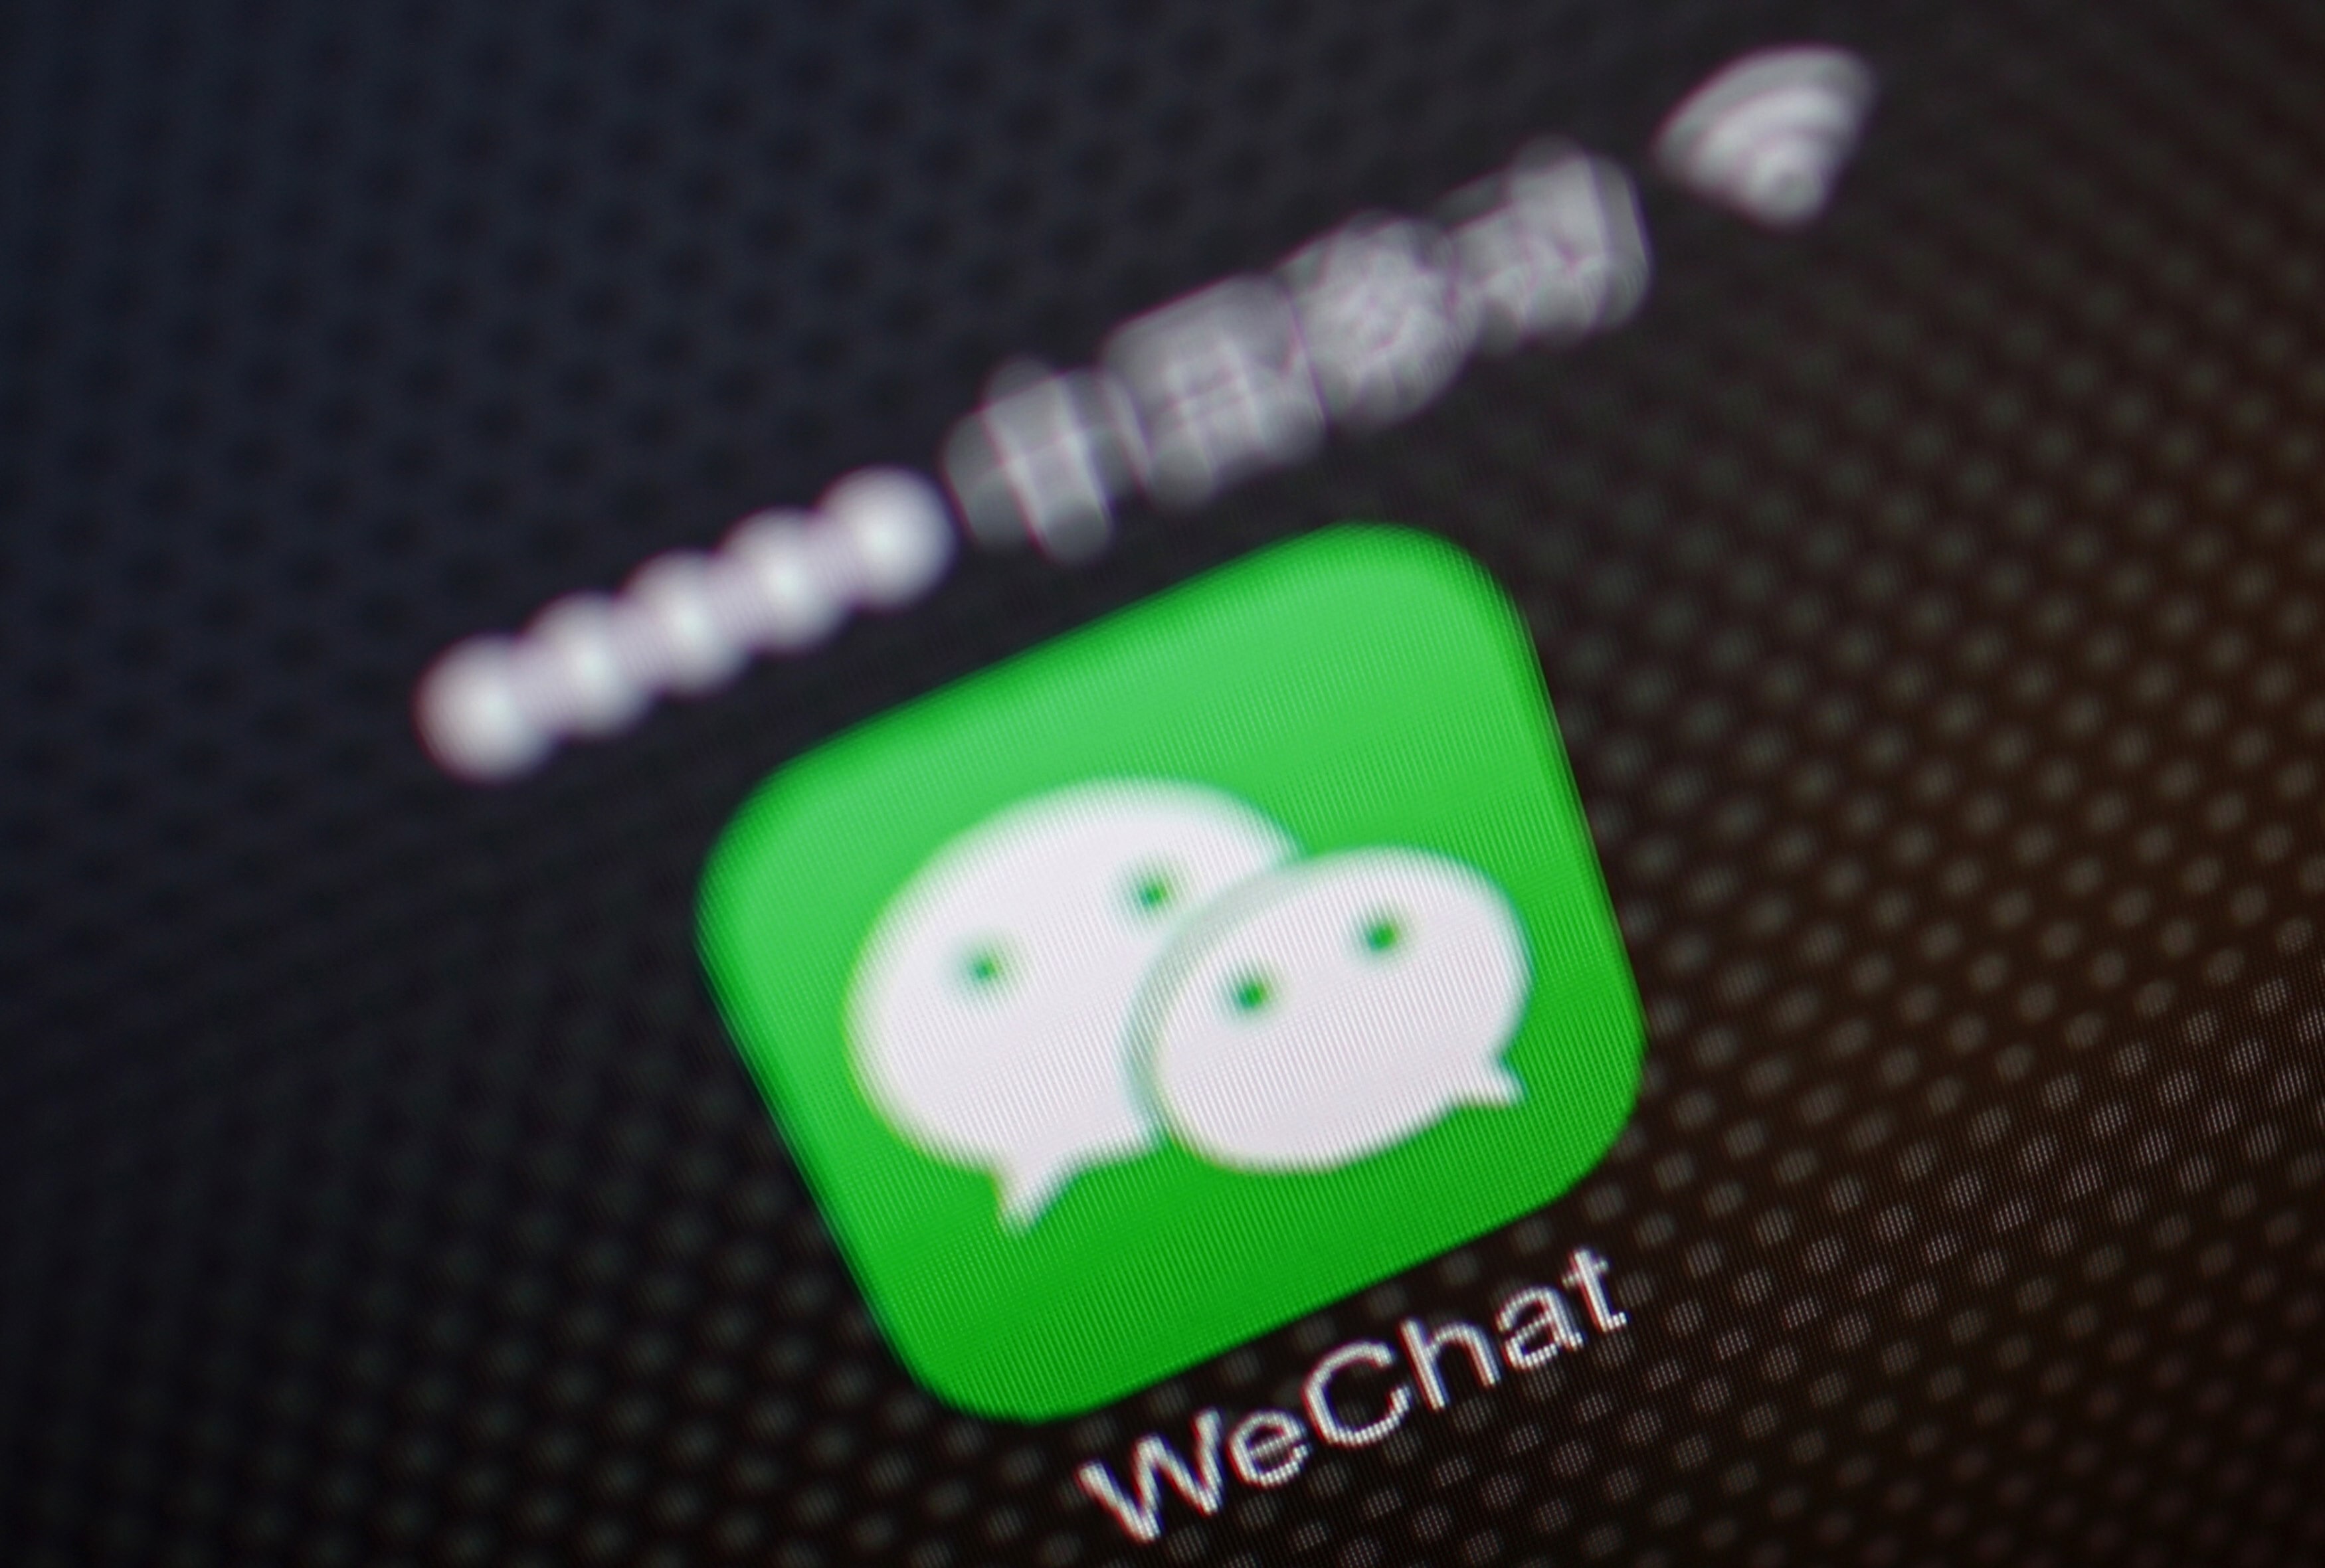 36 HQ Pictures Wechat Pay App Store / Wechat Wikipedia